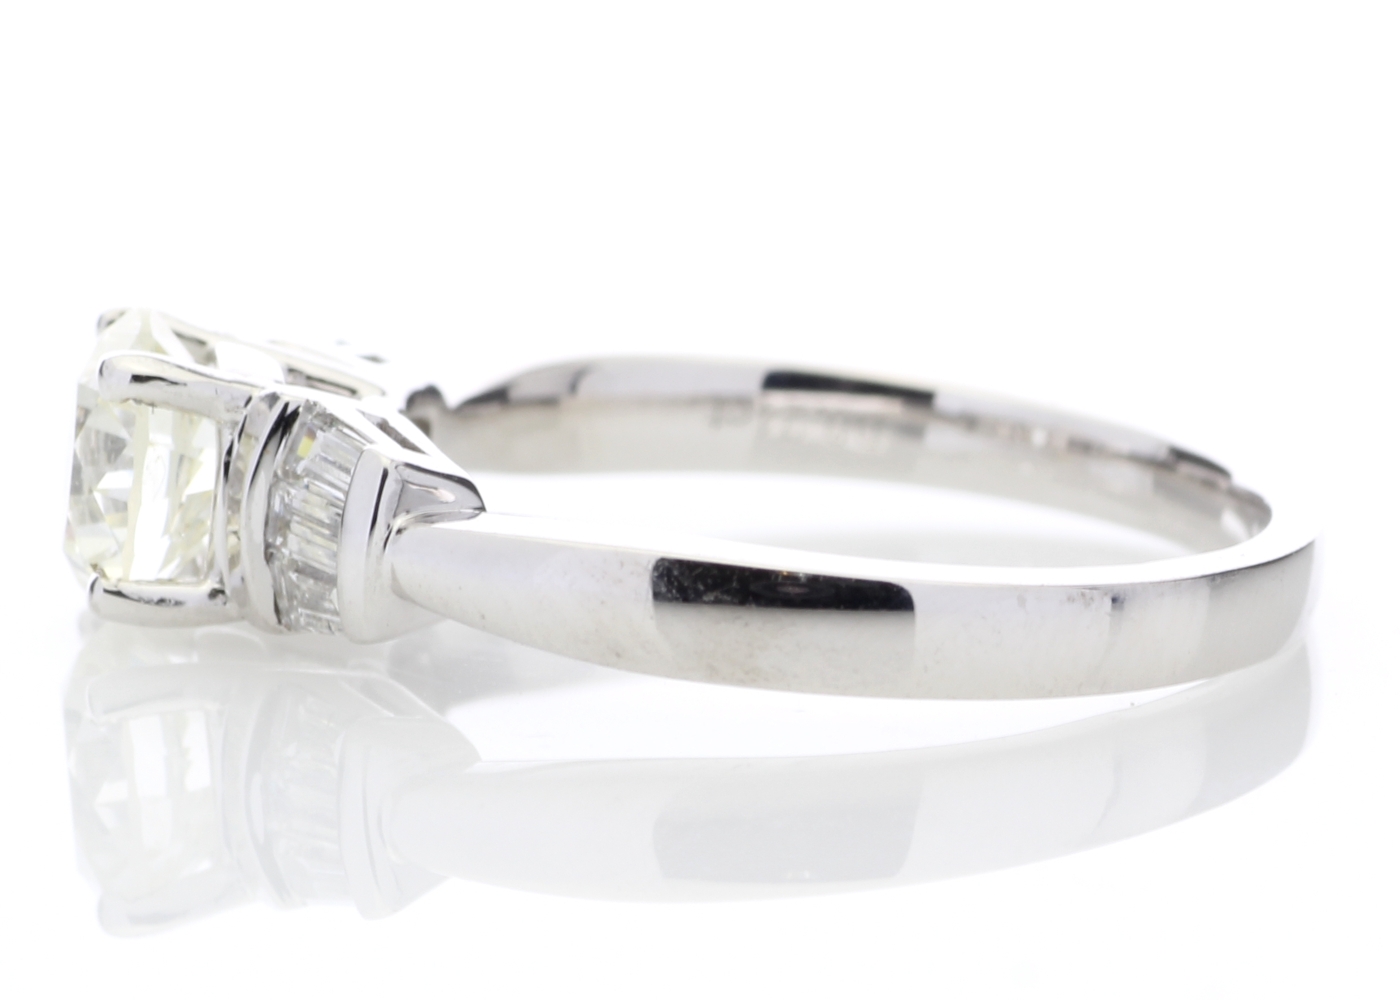 18ctWhite Gold Single Stone With Baguette Set Shoulders Diamond Ring (1.03) 1.26 Carats - Image 3 of 5